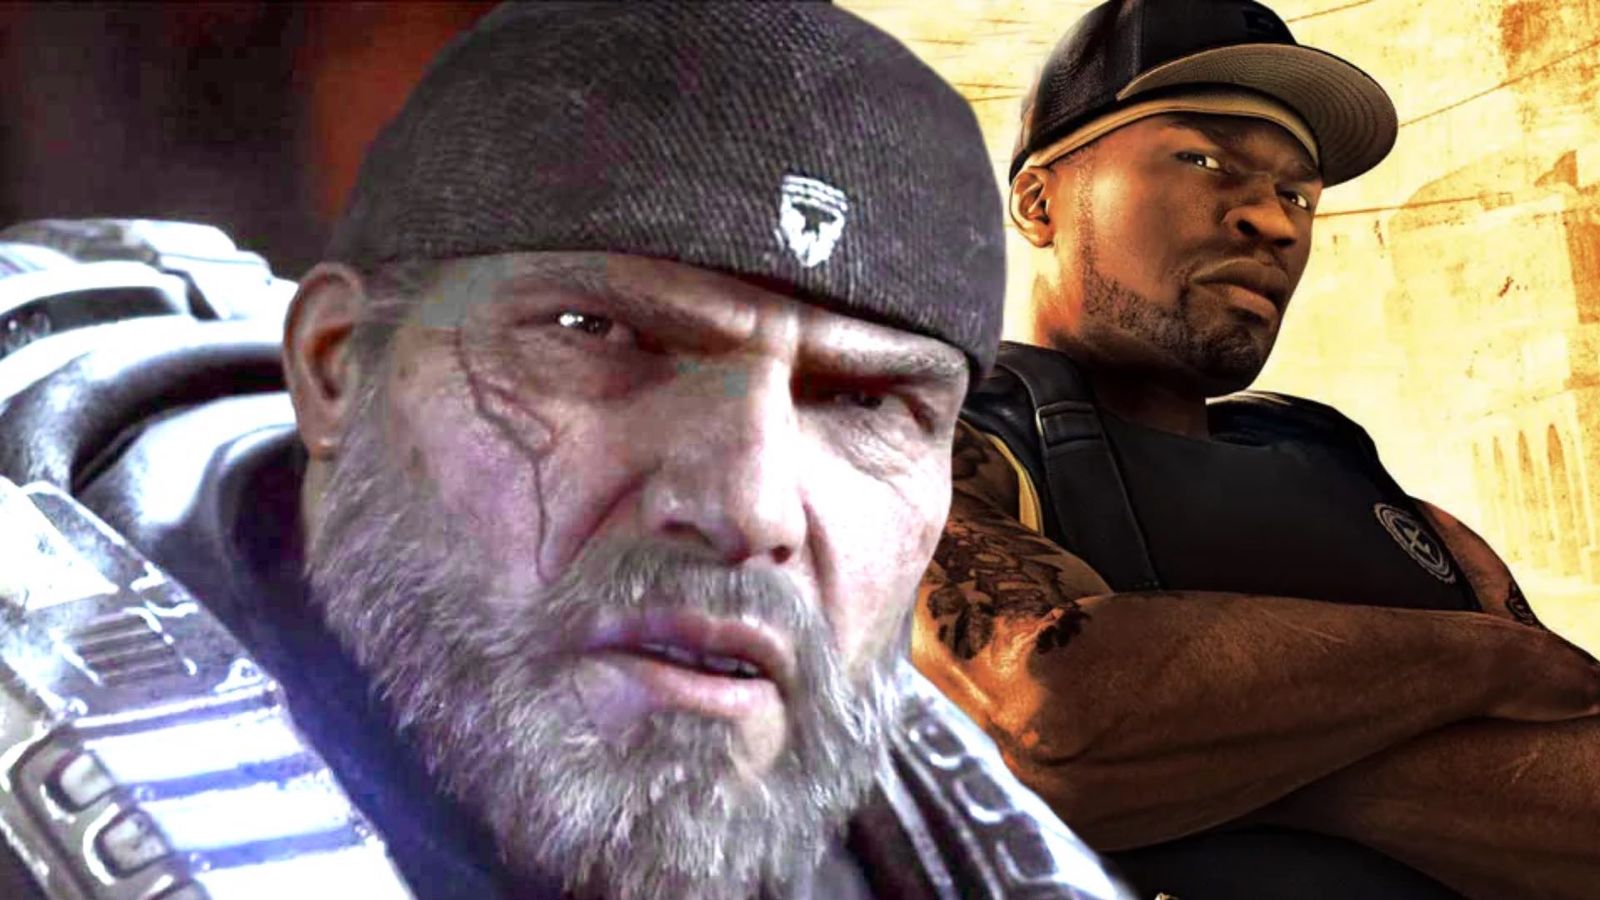 Gears of War character Marcus Fenix next to Hip Hop star 50 Cent